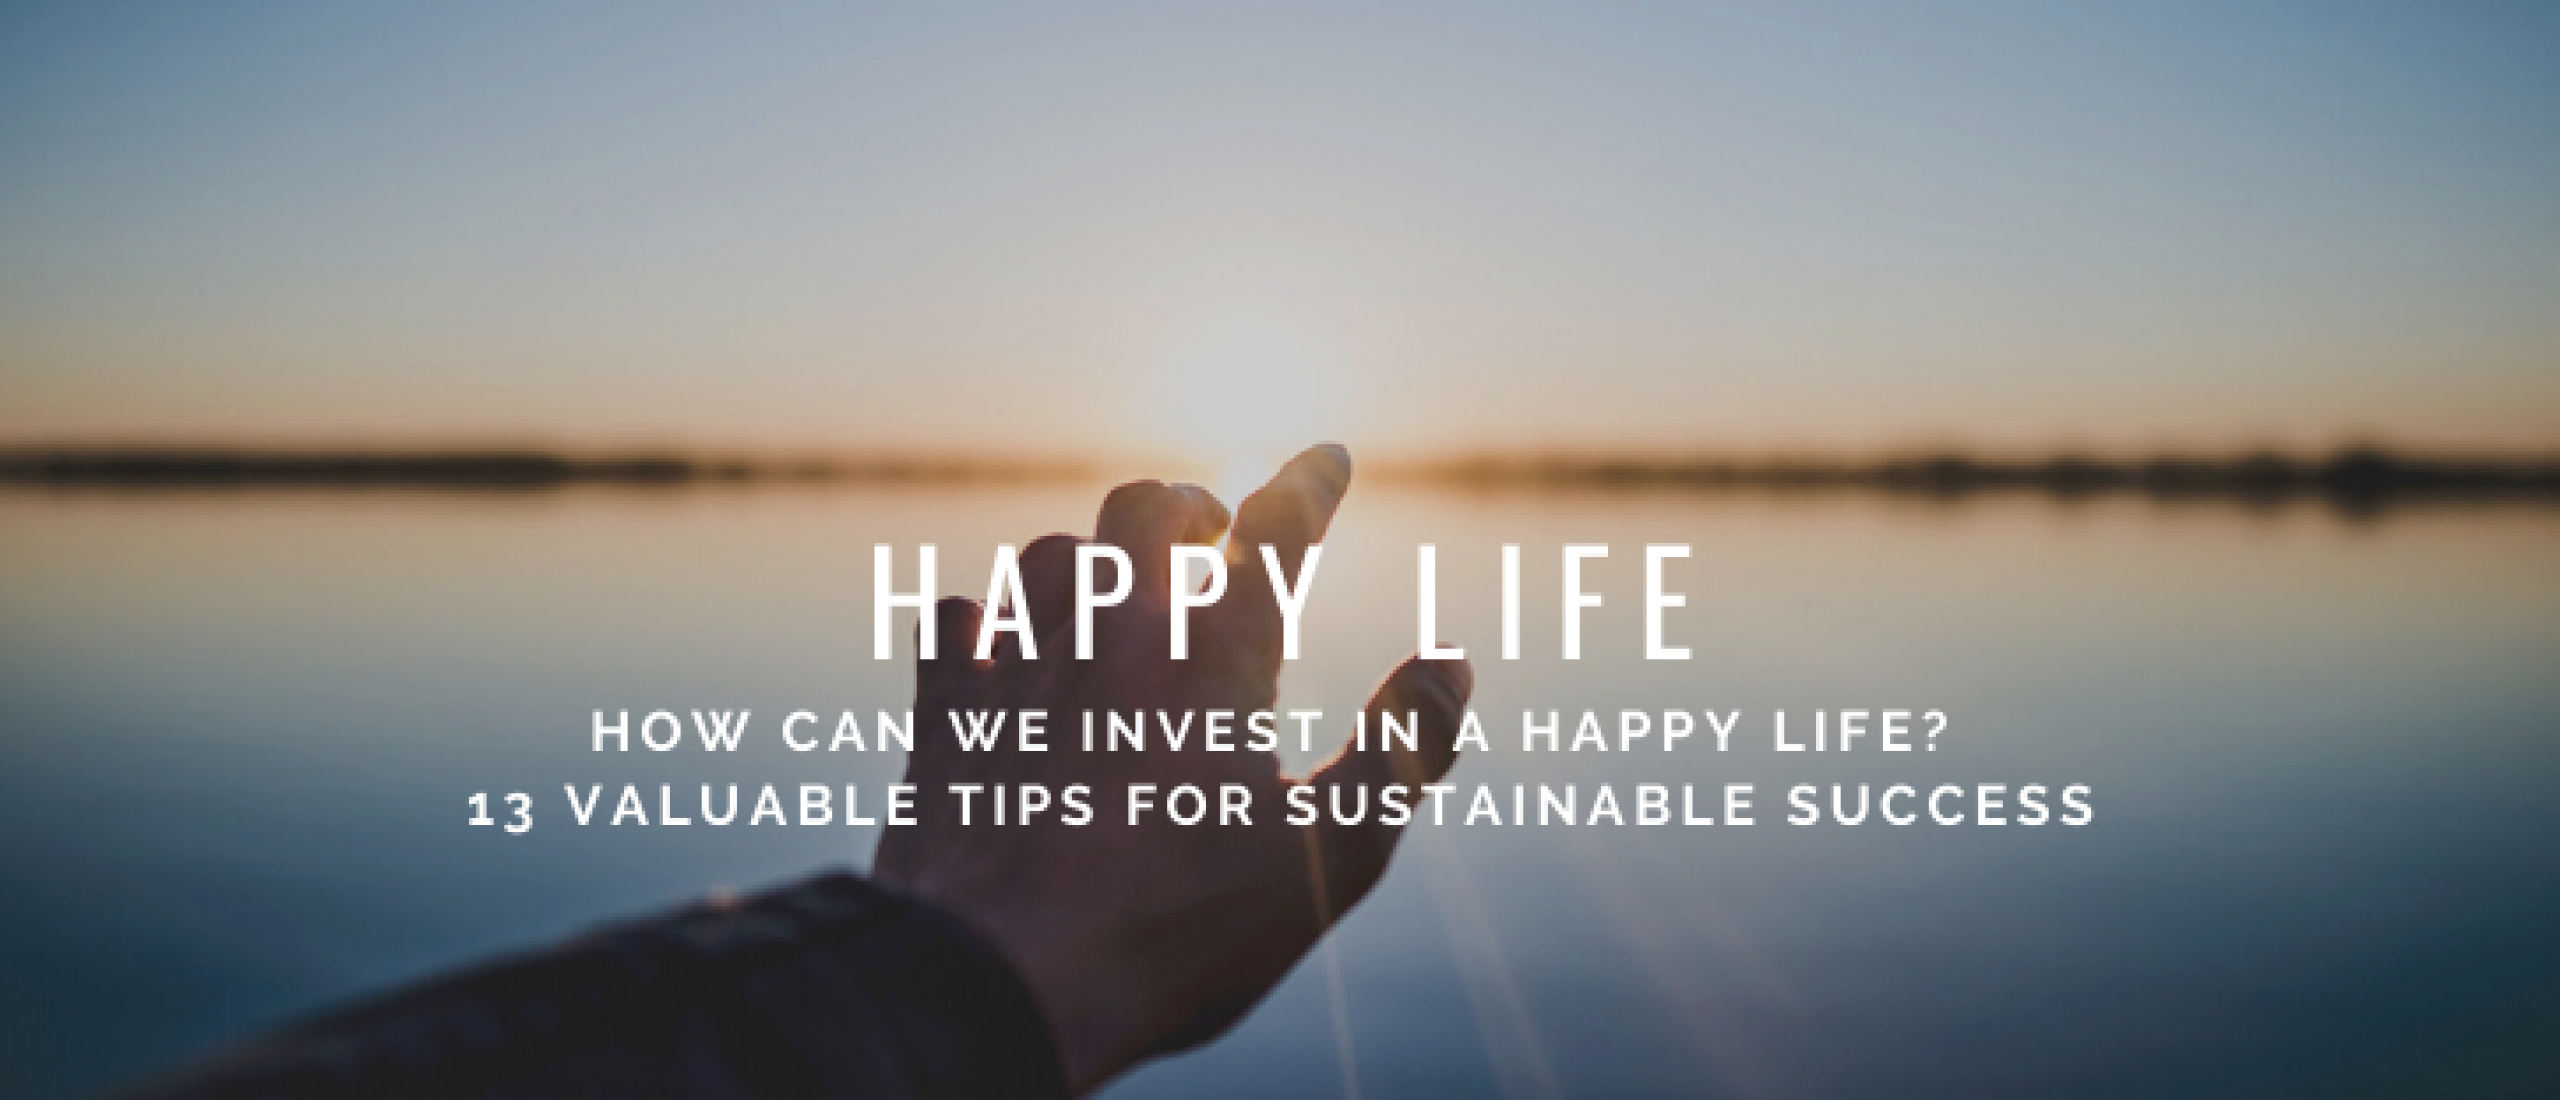 How to Invest in a Happy Life? 13 Tips With Value